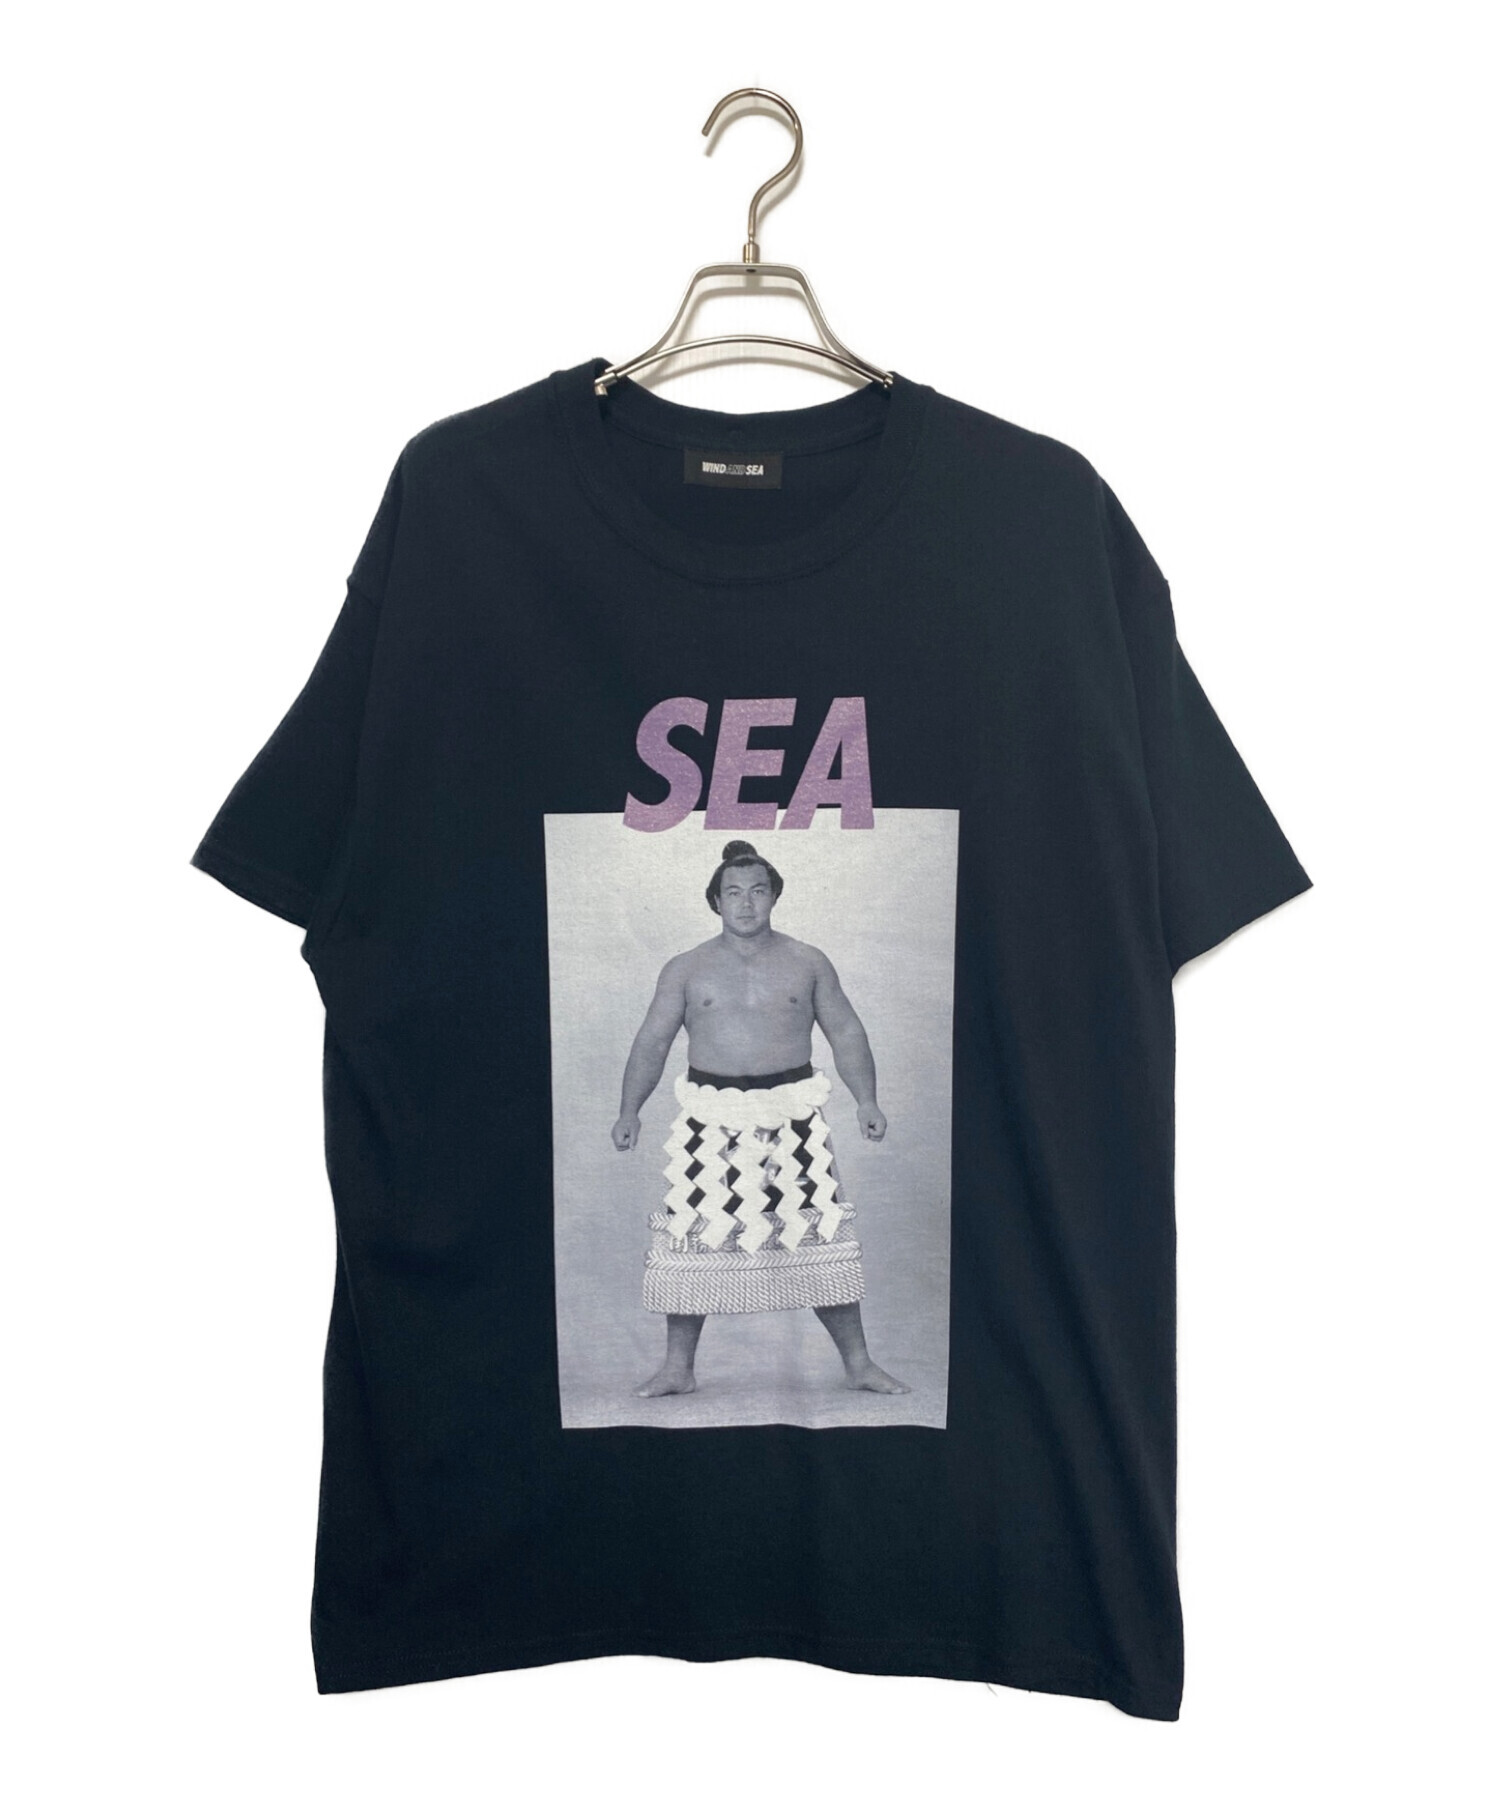 WIND AND SEA Tシャツ - Tシャツ